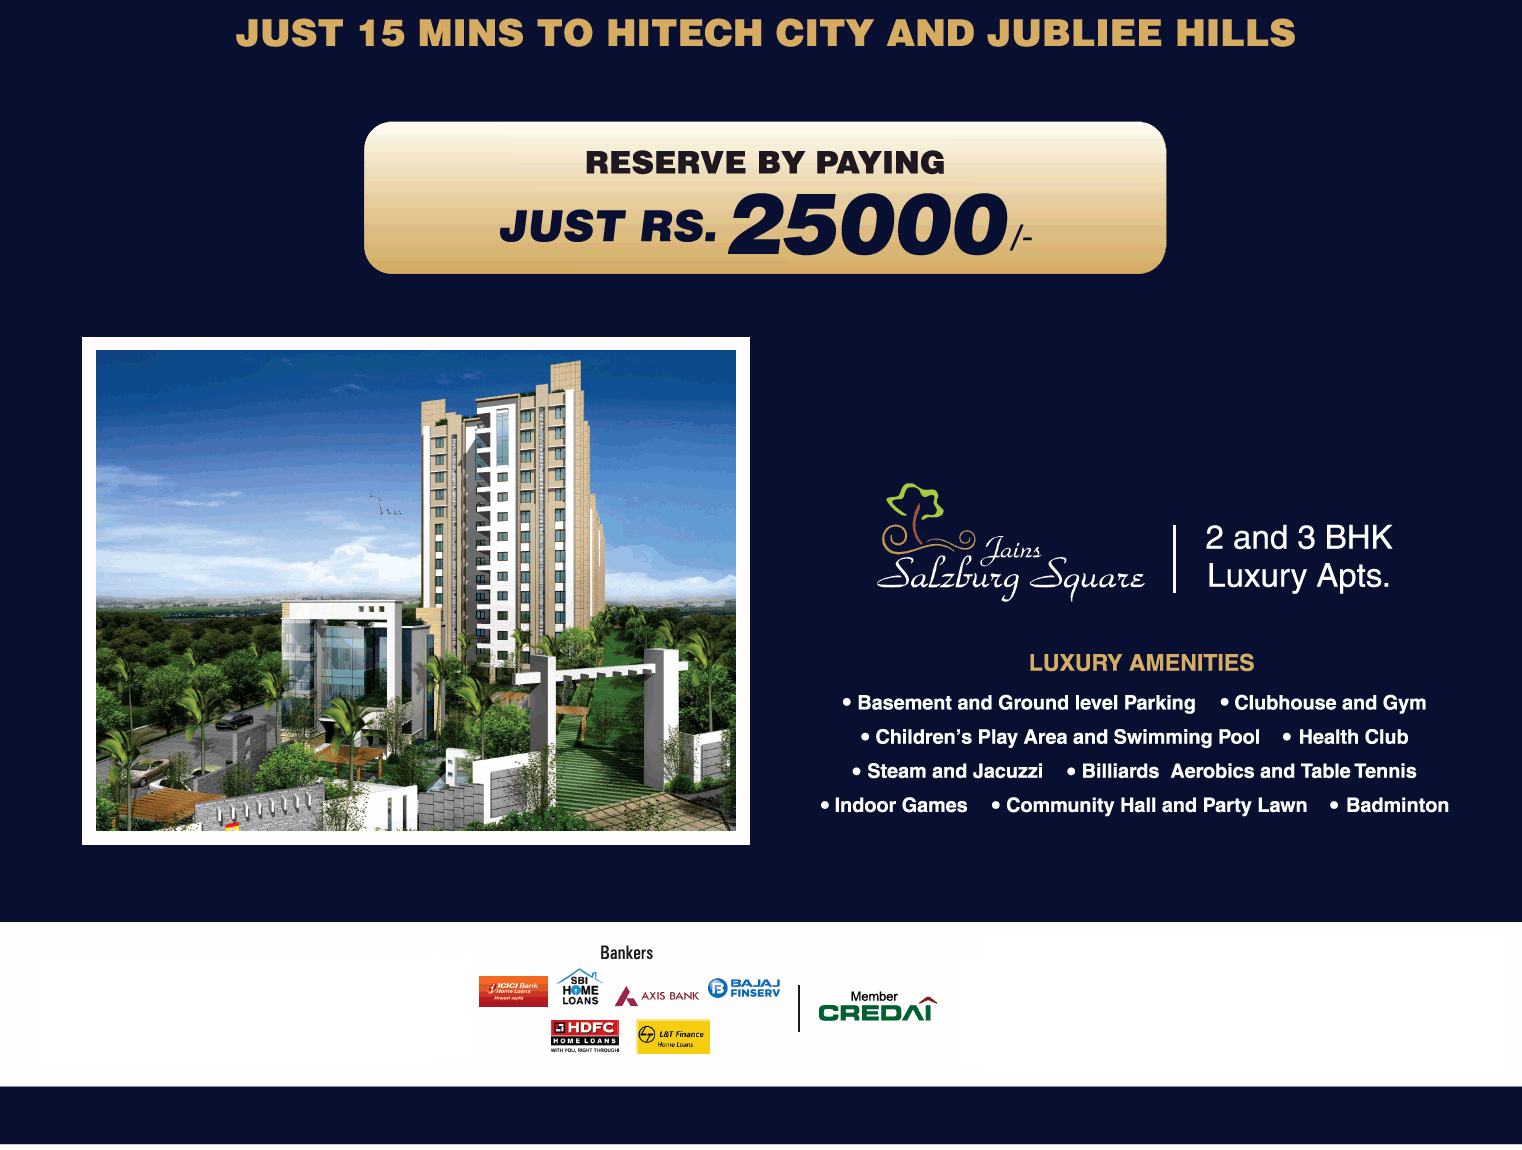 2 and 3 BHK luxury apartments at Jains Salzburg Square in Hyderabad Update